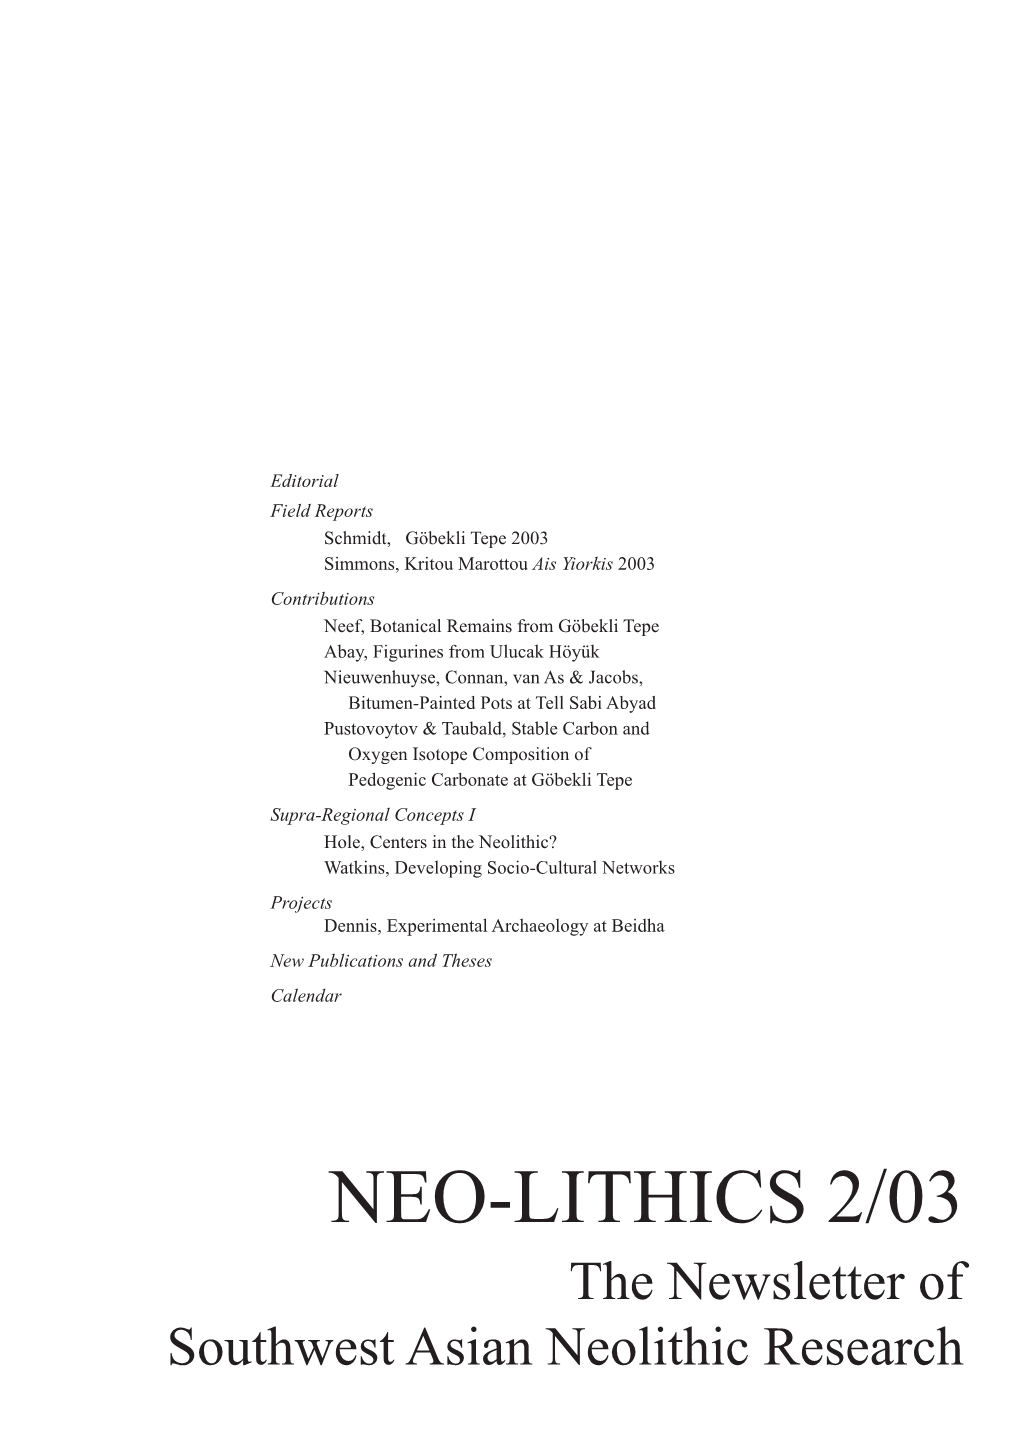 NEO-LITHICS 2/03 the Newsletter of Southwest Asian Neolithic Research Contents